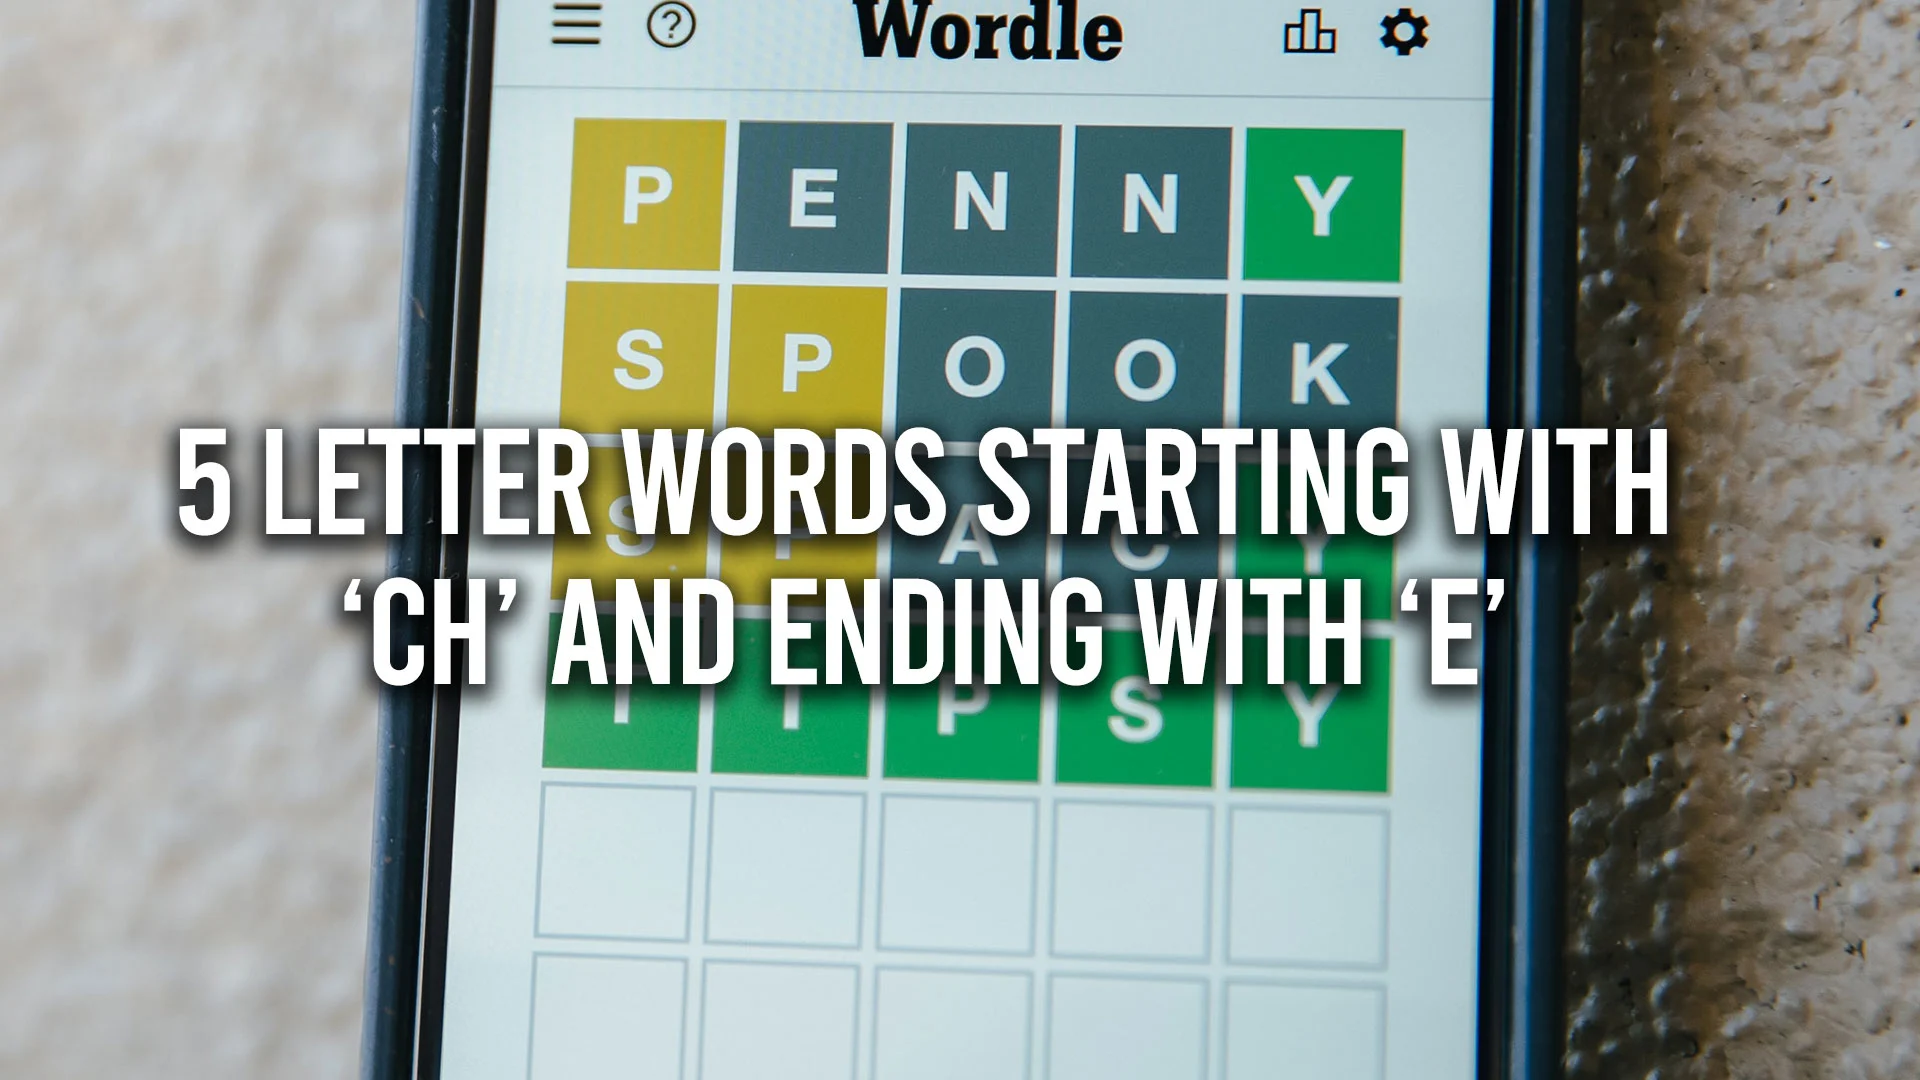 5-Letter Words Starting With CH and Ending with E